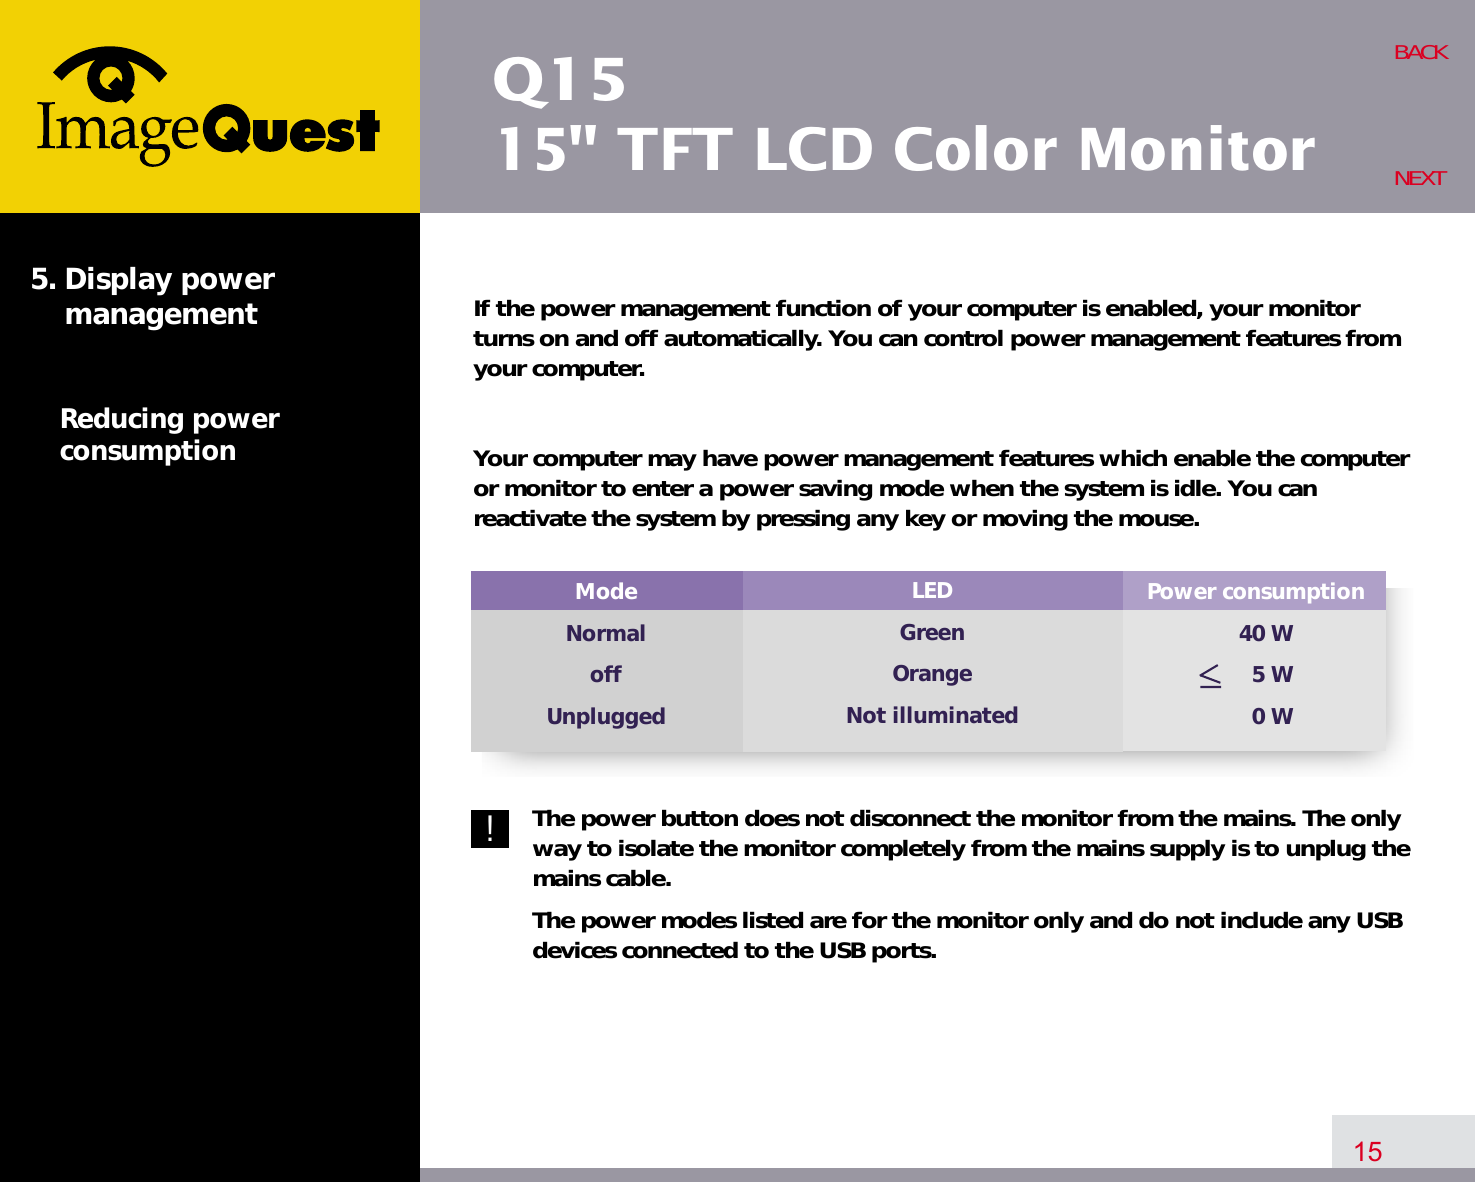 Q1515&quot; TFT LCD Color MonitorIf the power management function of your computer is enabled, your monitorturns on and off automatically. You can control power management features fromyour computer.Your computer may have power management features which enable the computeror monitor to enter a power saving mode when the system is idle. You canreactivate the system by pressing any key or moving the mouse.The power button does not disconnect the monitor from the mains. The onlyway to isolate the monitor completely from the mains supply is to unplug themains cable.The power modes listed are for the monitor only and do not include any USBdevices connected to the USB ports.15BACKNEXT5. Display power managementReducing powerconsumption!Power consumption40 W5 W0 WModeNormaloffUnpluggedLEDGreenOrangeNot illuminated